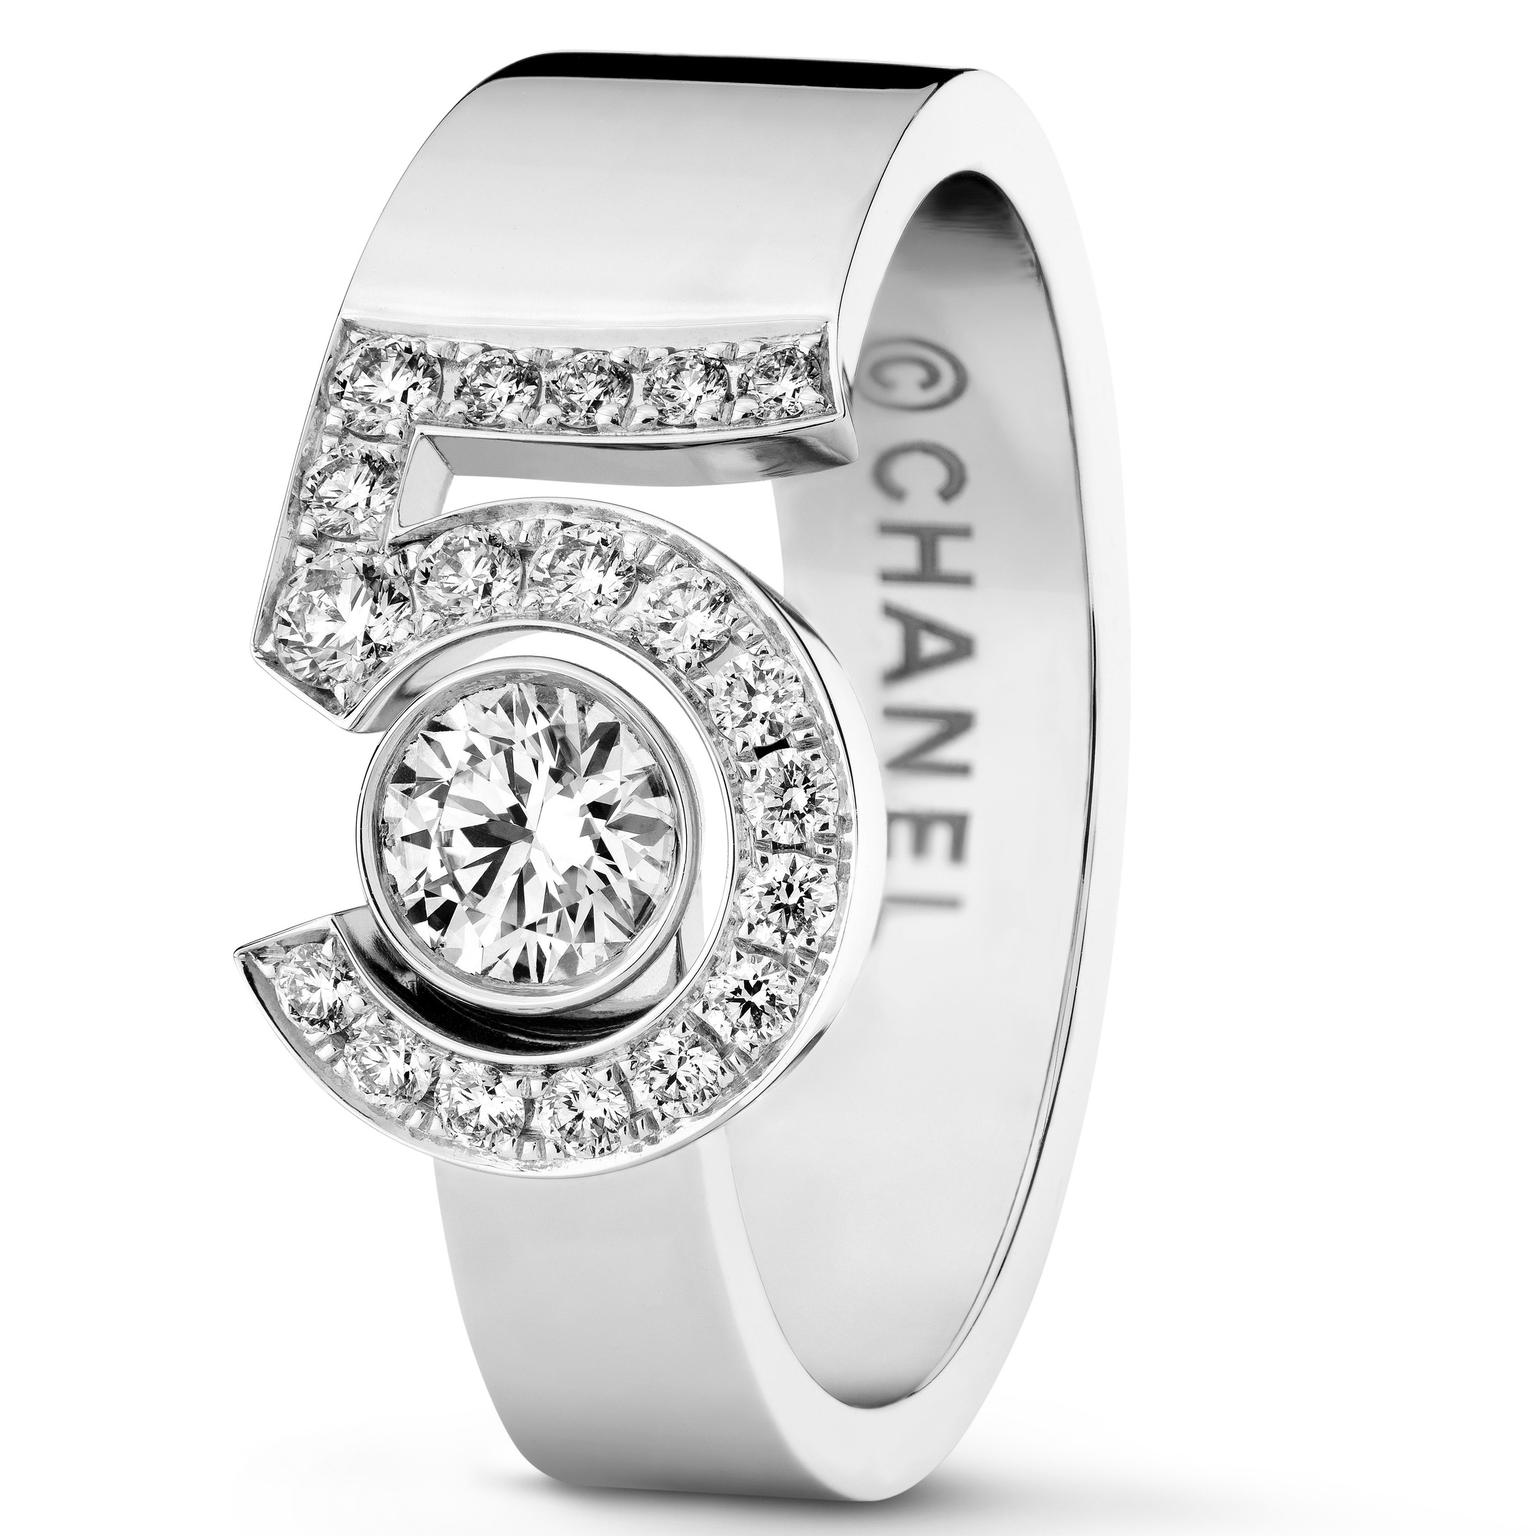 Eternal No5 ring by Chanel Chanel The Jewellery Editor